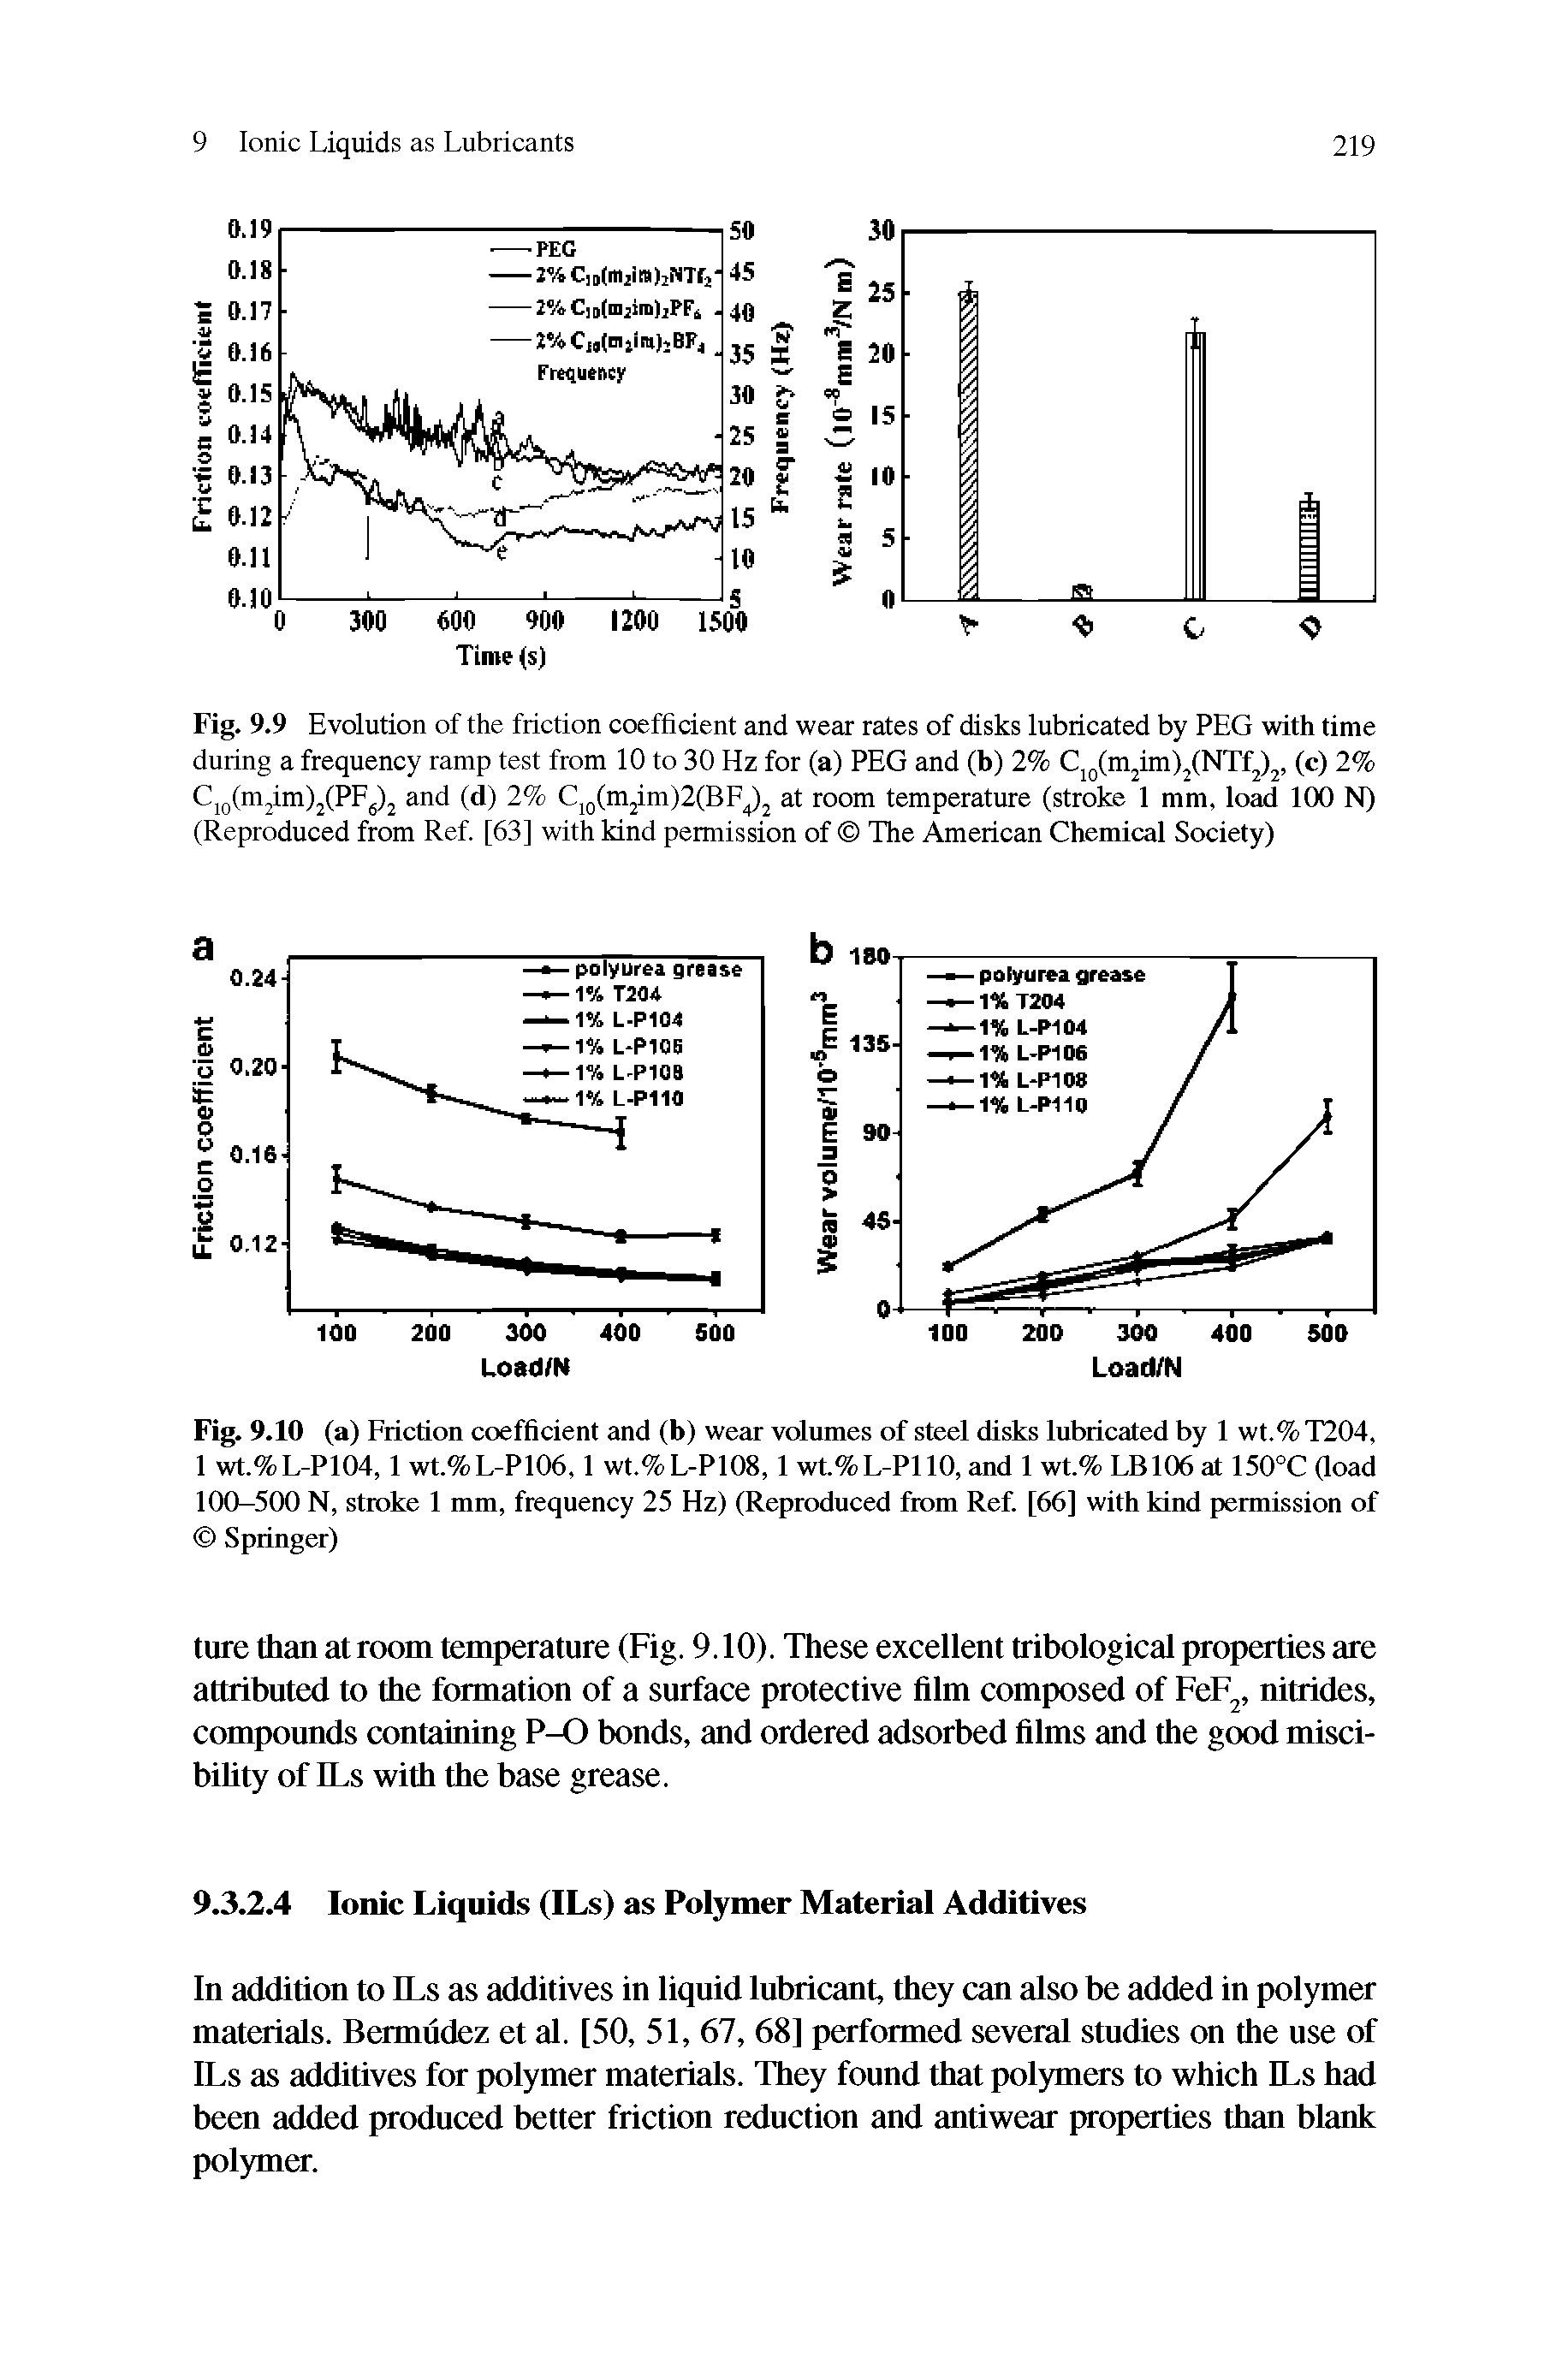 Fig. 9.9 Evolution of the friction coefficient and wear rates of disks lubricated by PEG with time during a frequency ramp test from 10 to 30 Hz for (a) PEG and (b) 2% Cj CmjimljlNTfj), (c) 2% Cj (mjim)j(PFg)j and (d) 2% C, (mjim)2(BF 2 at room temperature (stroke 1 mm, load 100 N) (Reproduced from Ref. [63] with kind permission of The American Chemical Society)...